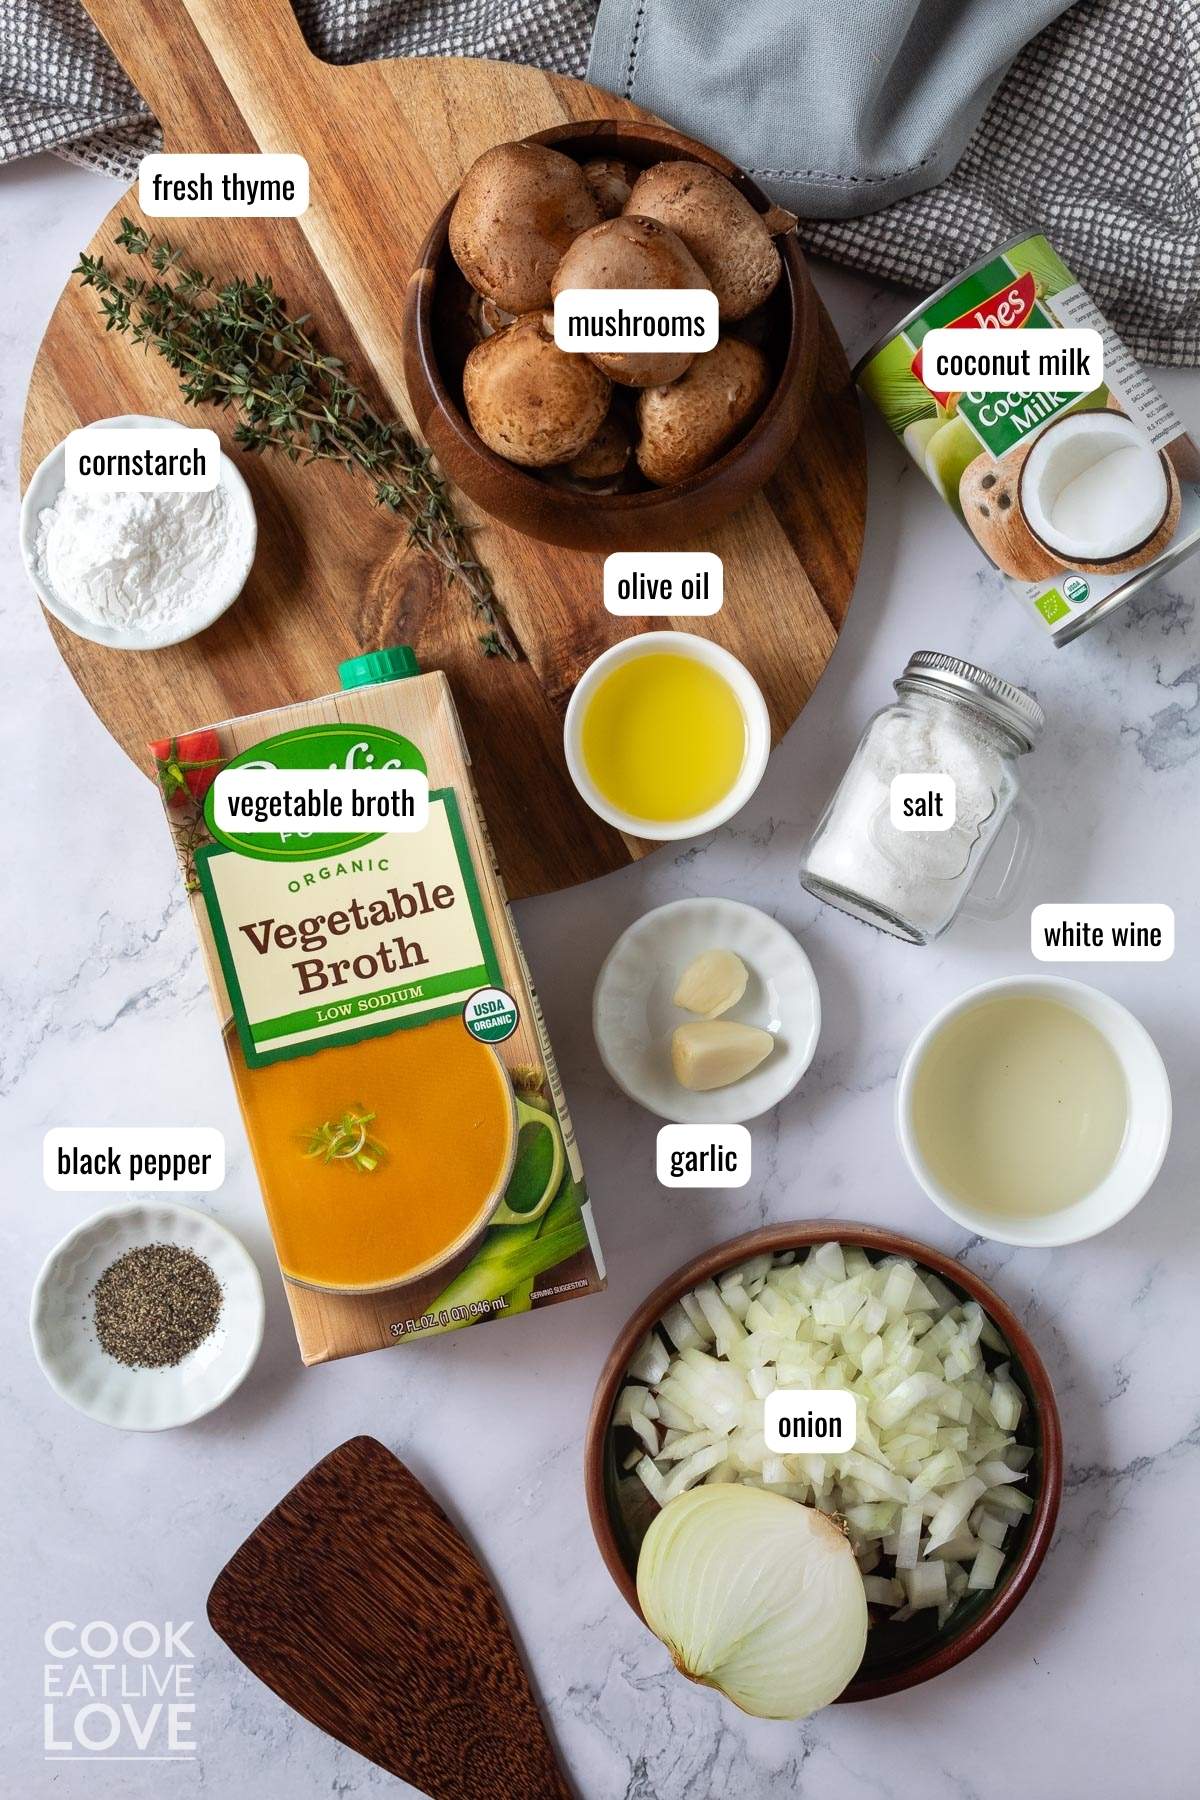 Ingredients to make vegan mushroom sauce on the table with text labels.